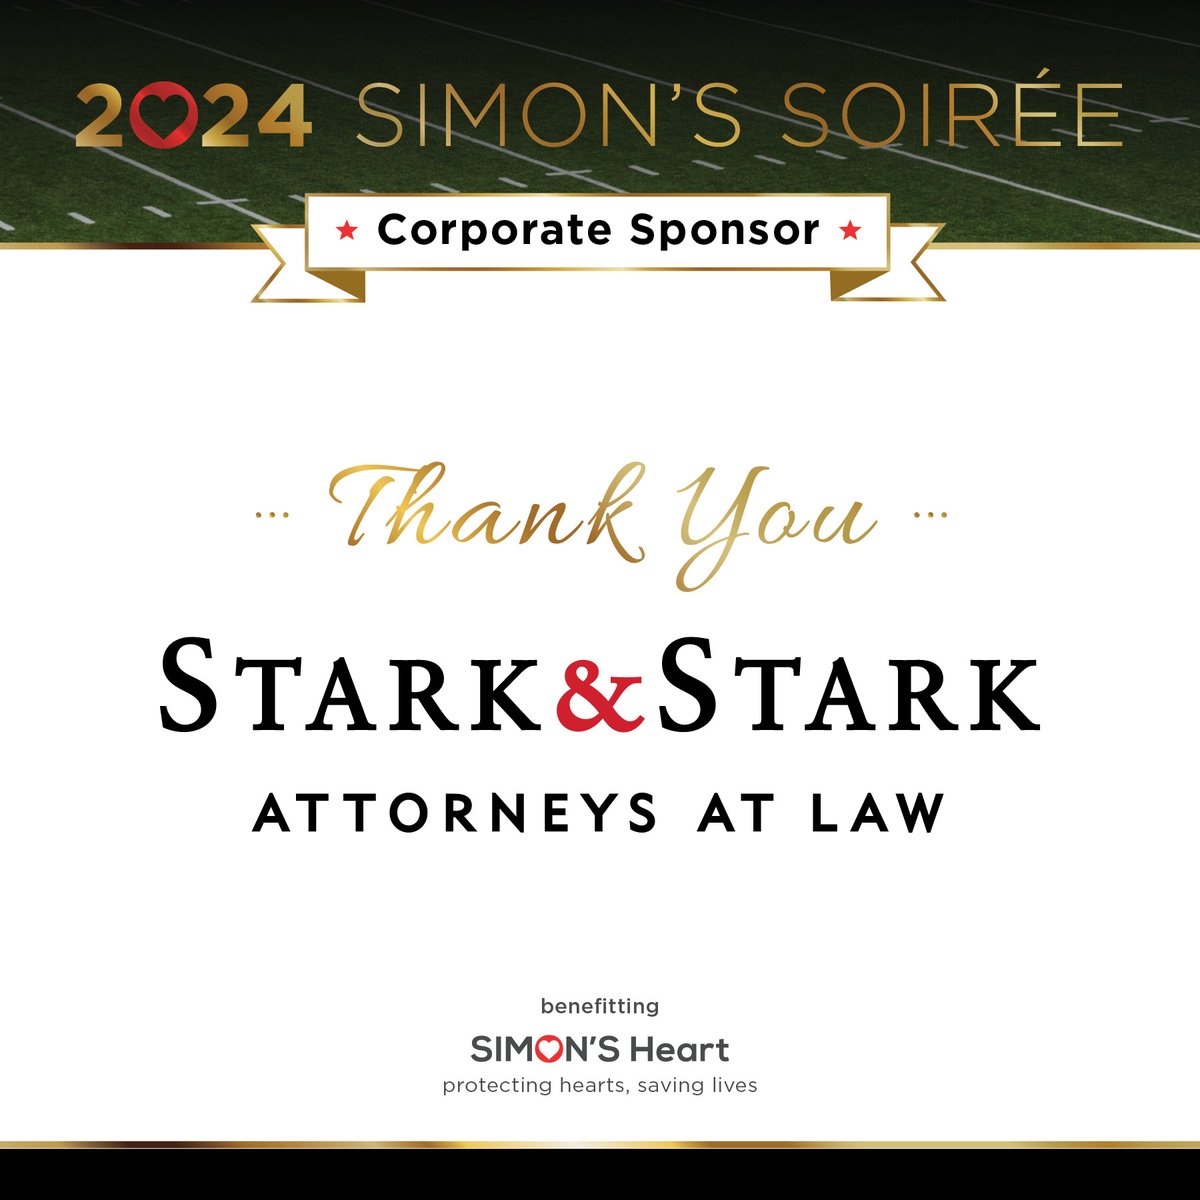 We’re grateful for Stark & Stark’s enduring partnership that extends far beyond Simon’s Soiree. Jeff Krawitz, a dedicated Board Member, has been a steadfast volunteer since our first heart screening. Thank you, Stark & Stark for joining us in our mission to save lives.